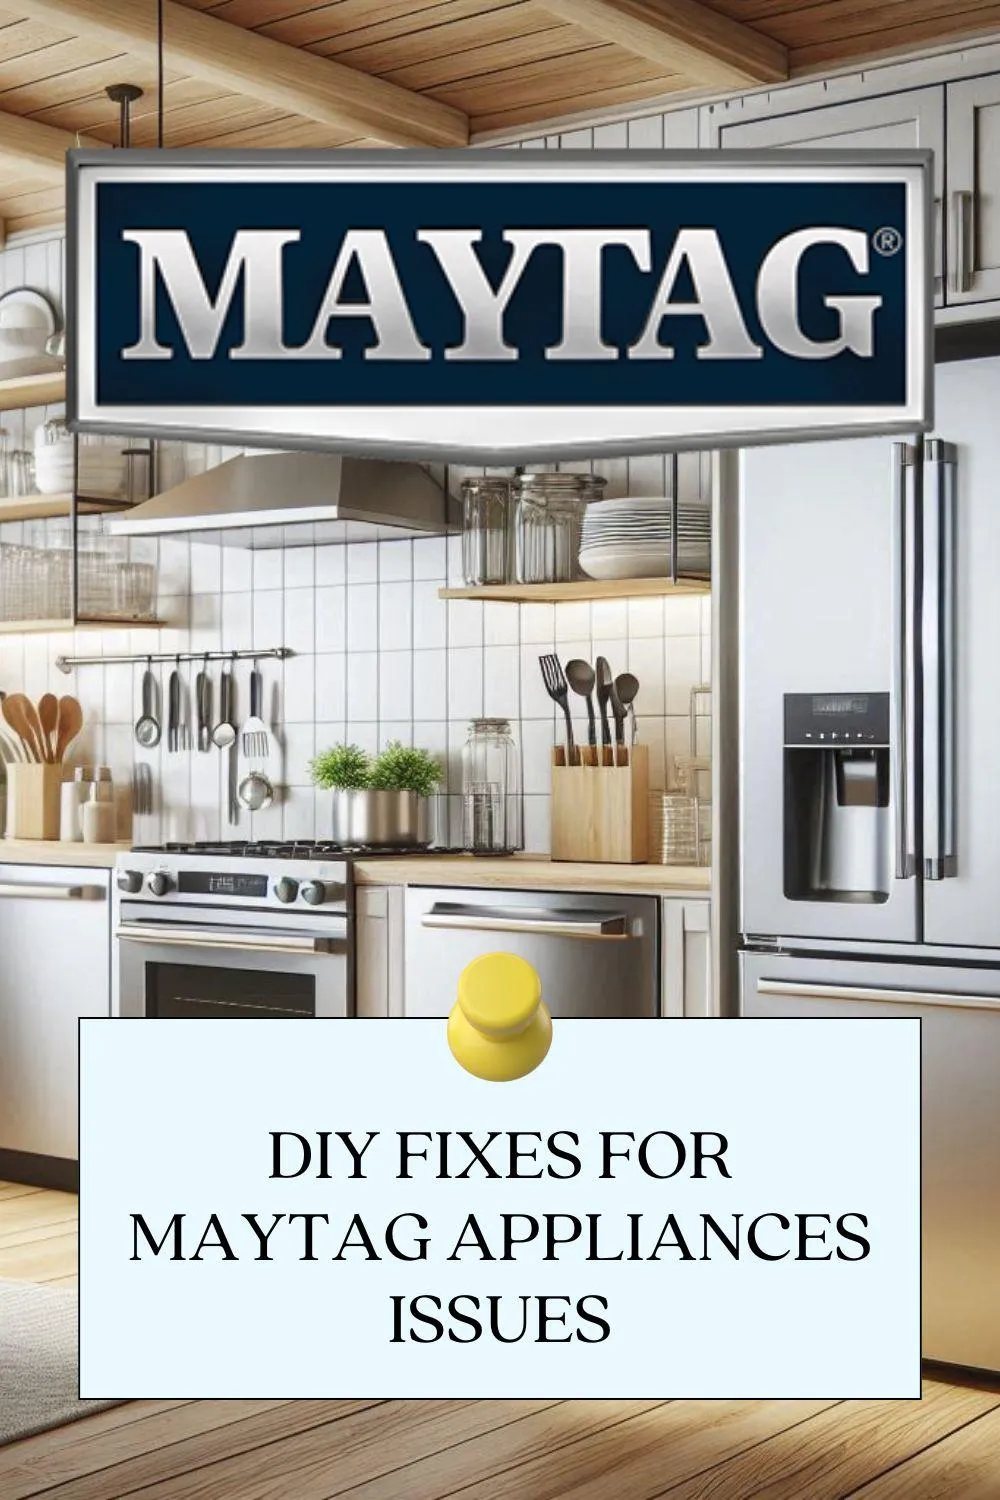 Maytag Appliances Issues: Quick Solutions for Homeowners